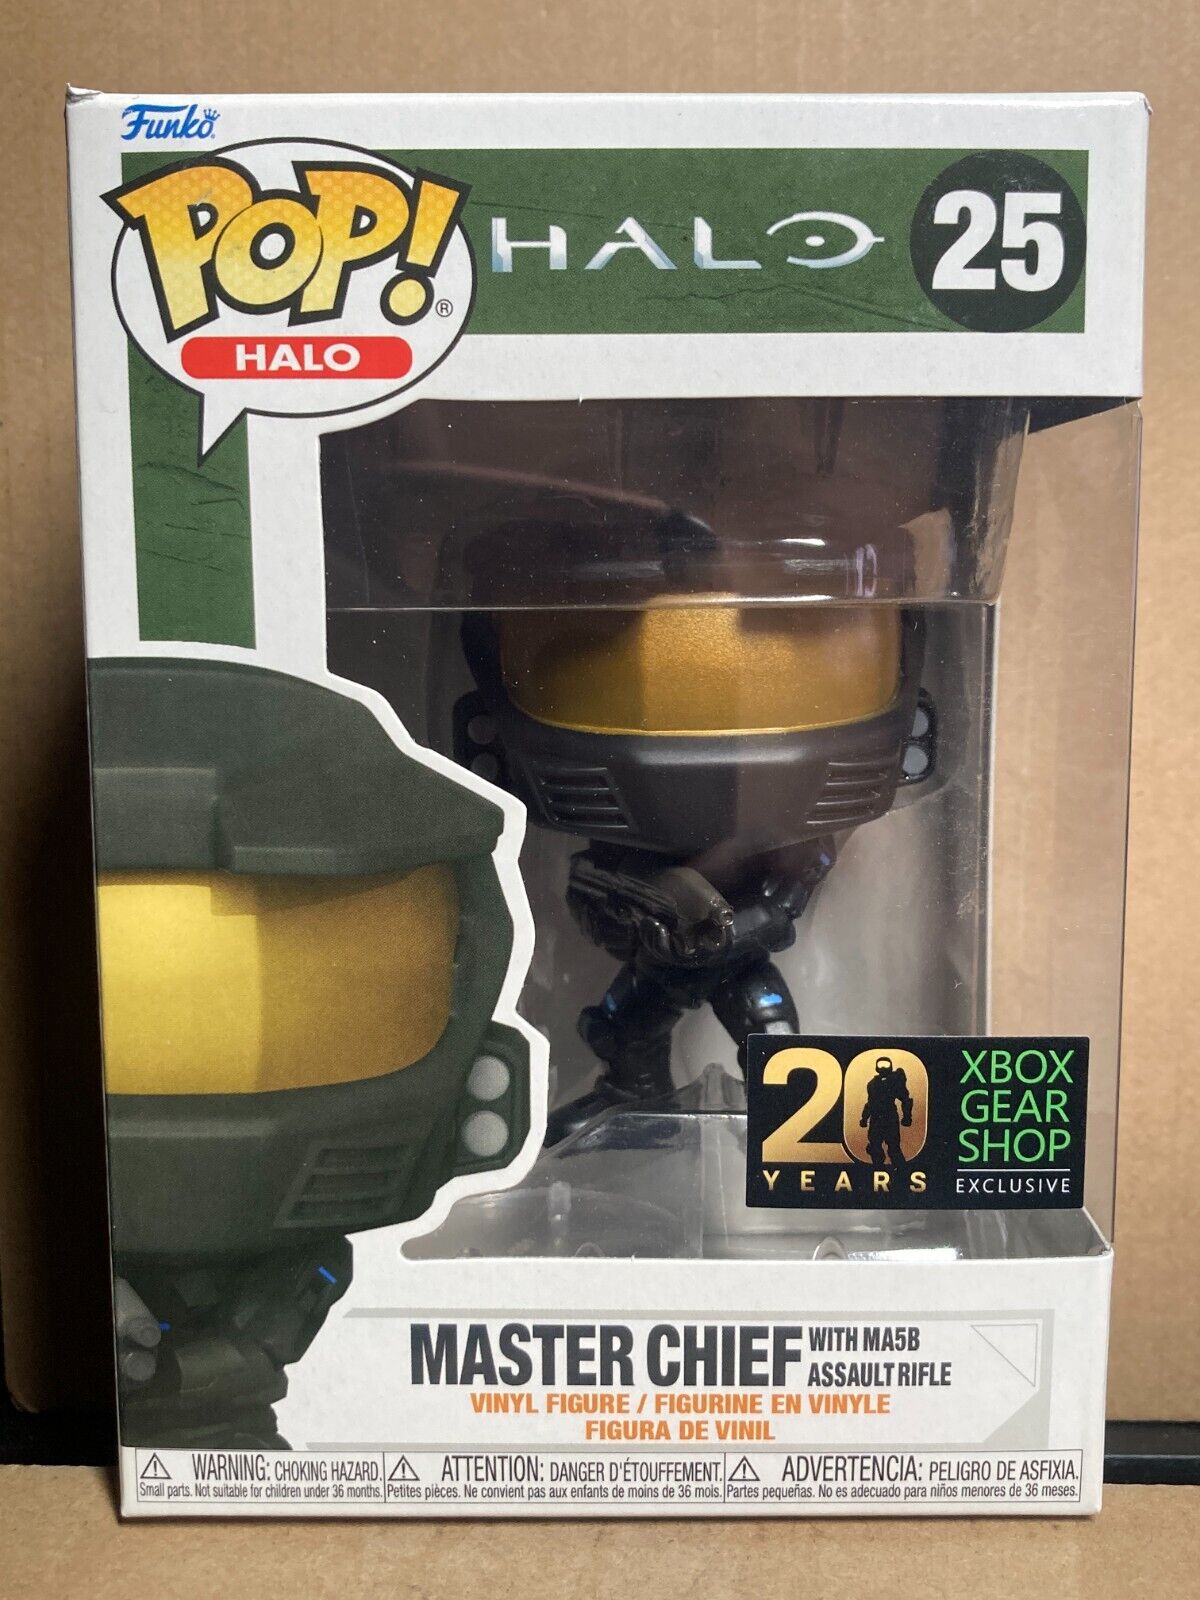 Funko POP Halo 25 XBox Gear Shop Exclusive Master Chief with MA5B Assault Rifle